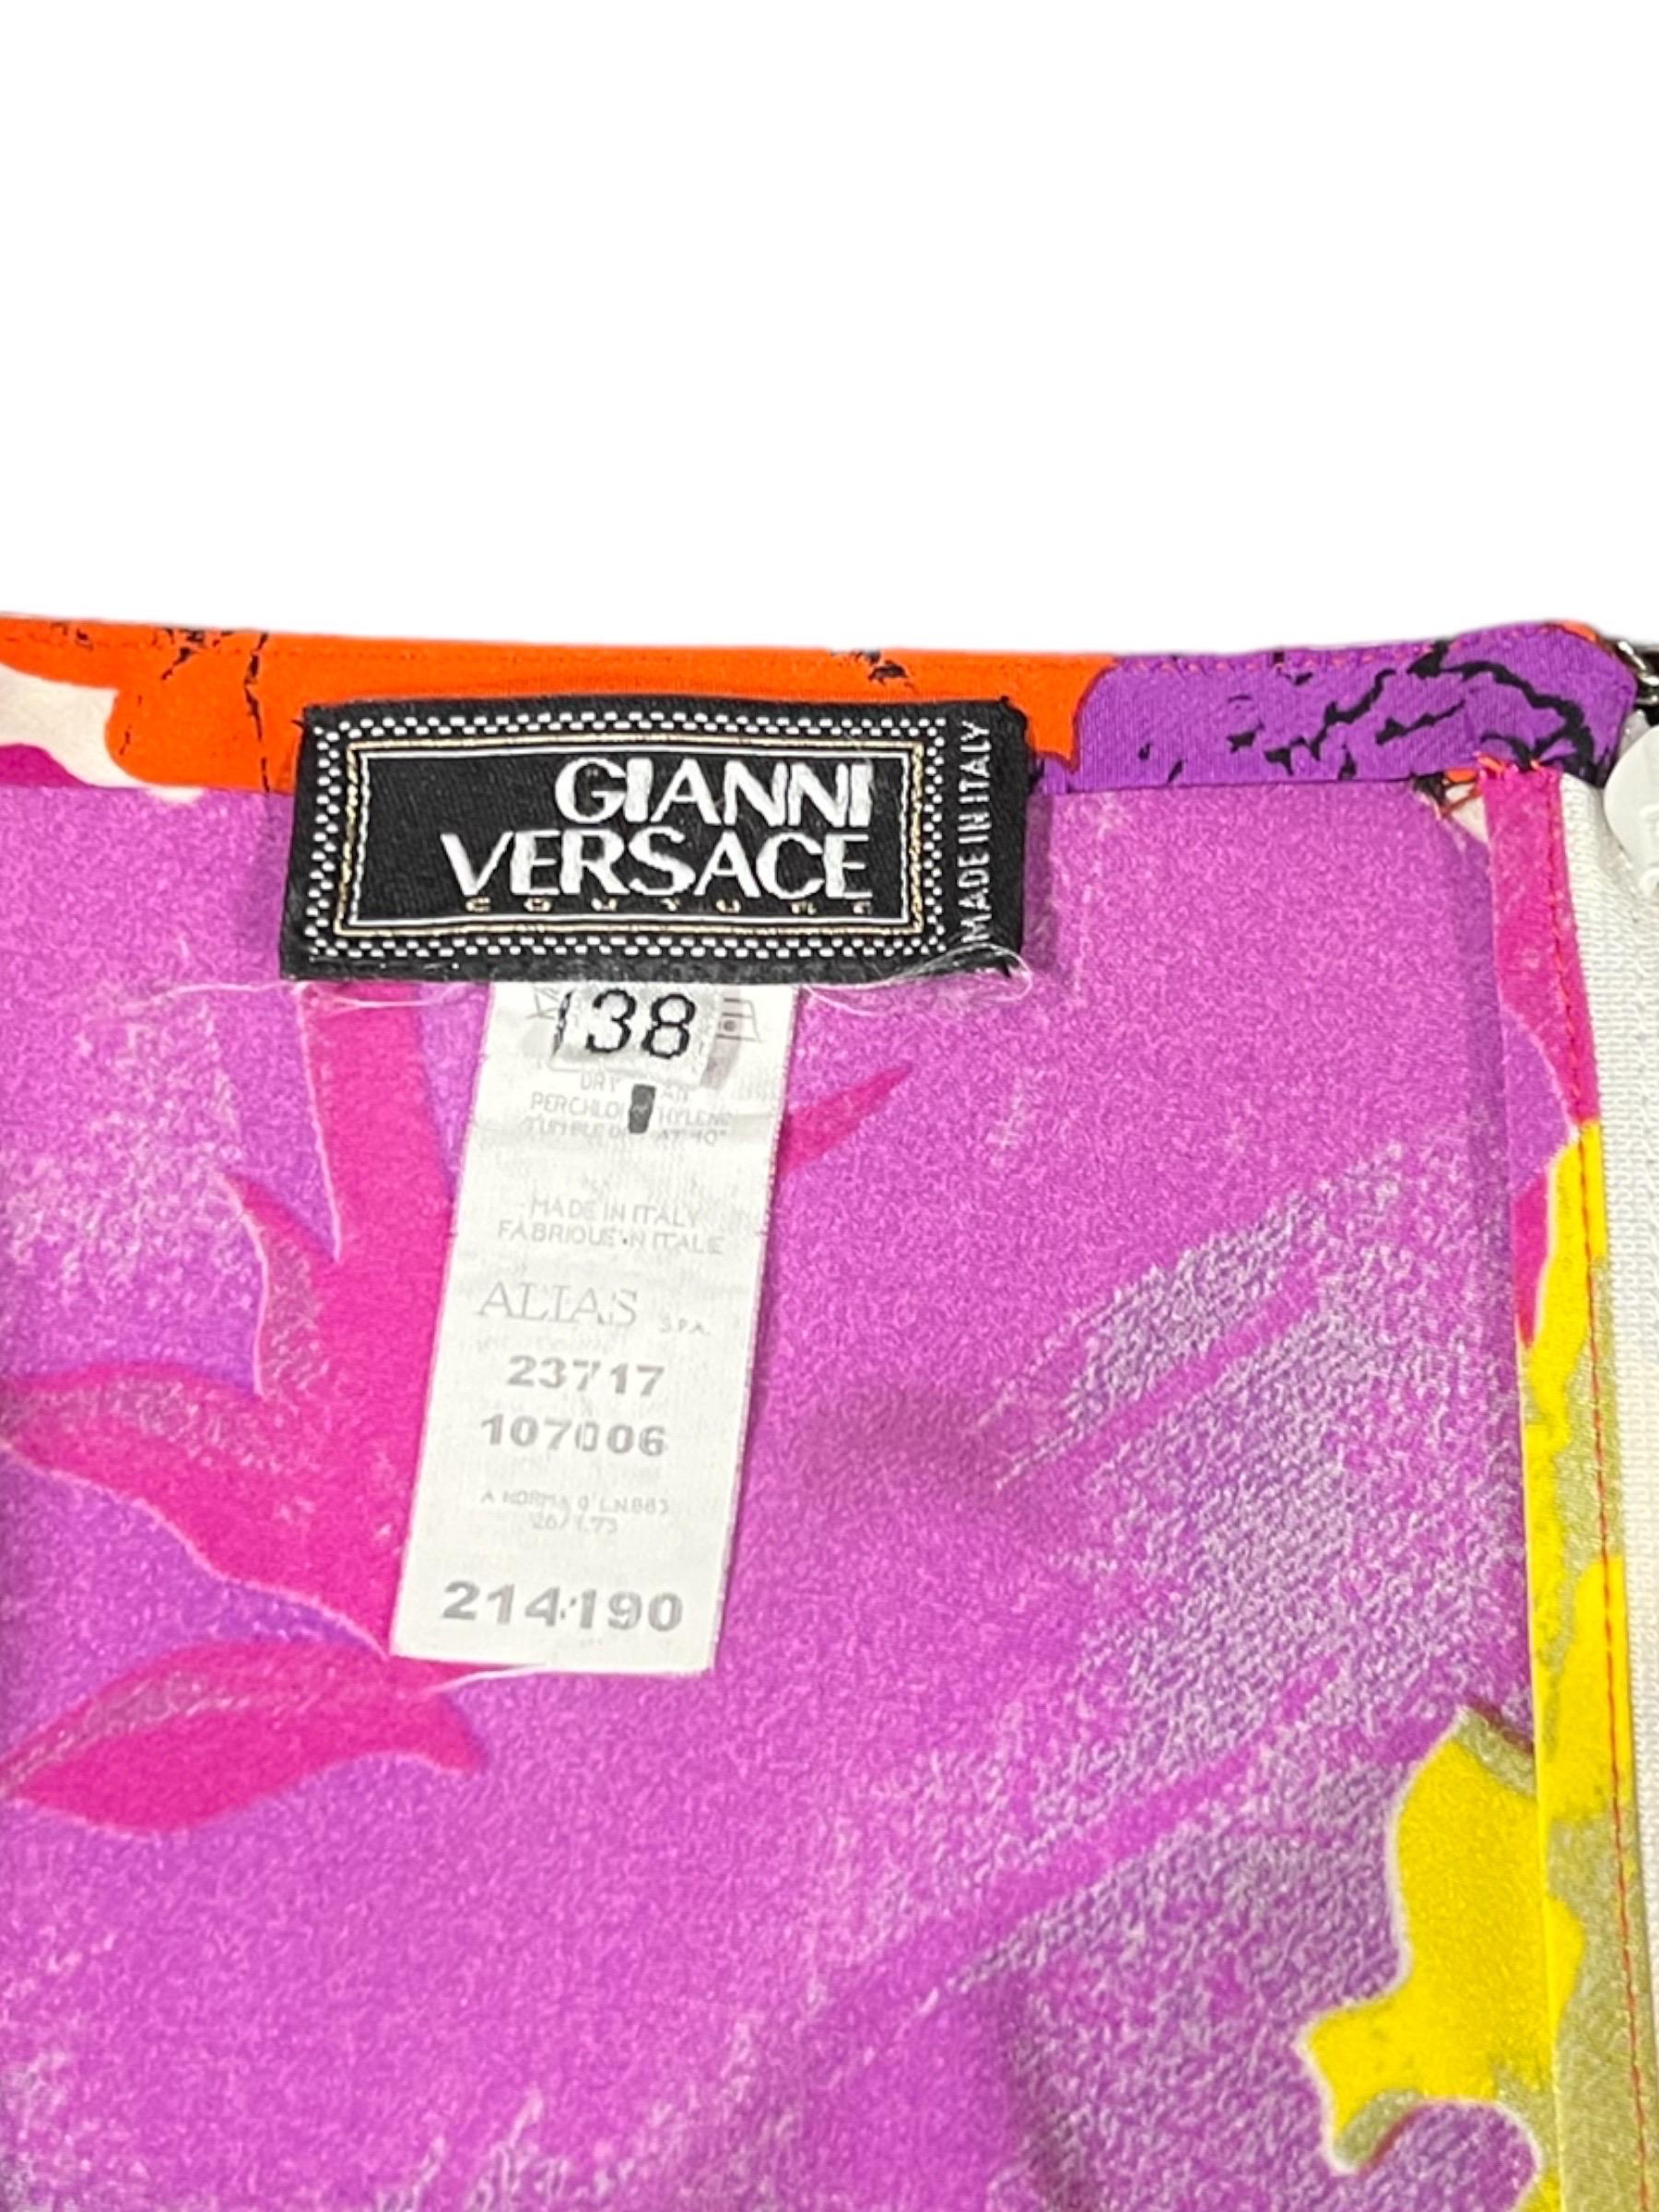 S/S 2002 Gianni Versace by Donatella Floral Beaded Runway Pants For Sale 6